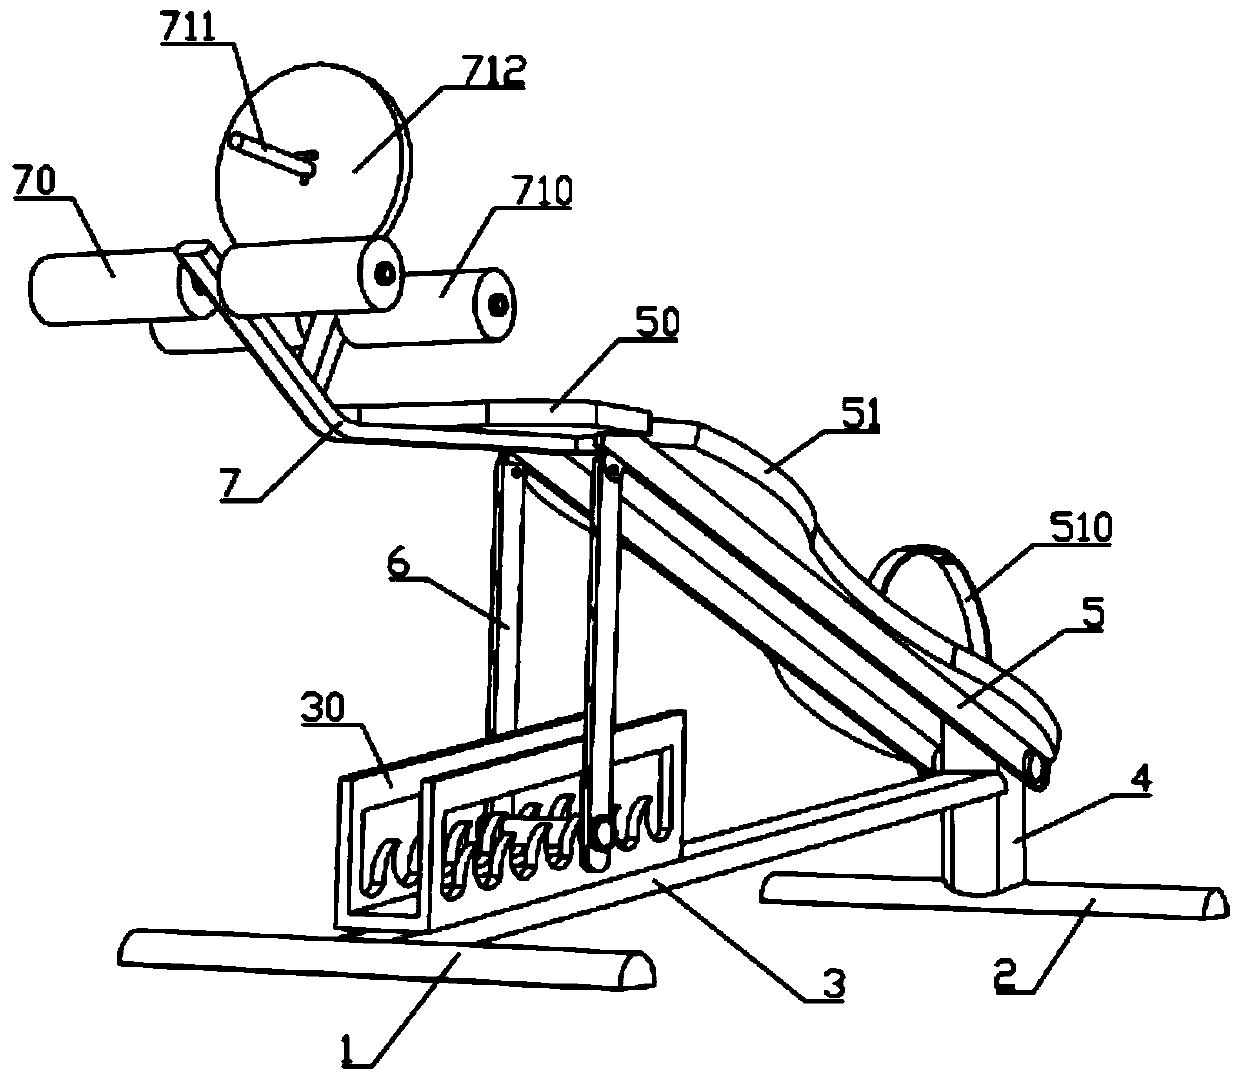 A weight-bearing abdominal muscle training device